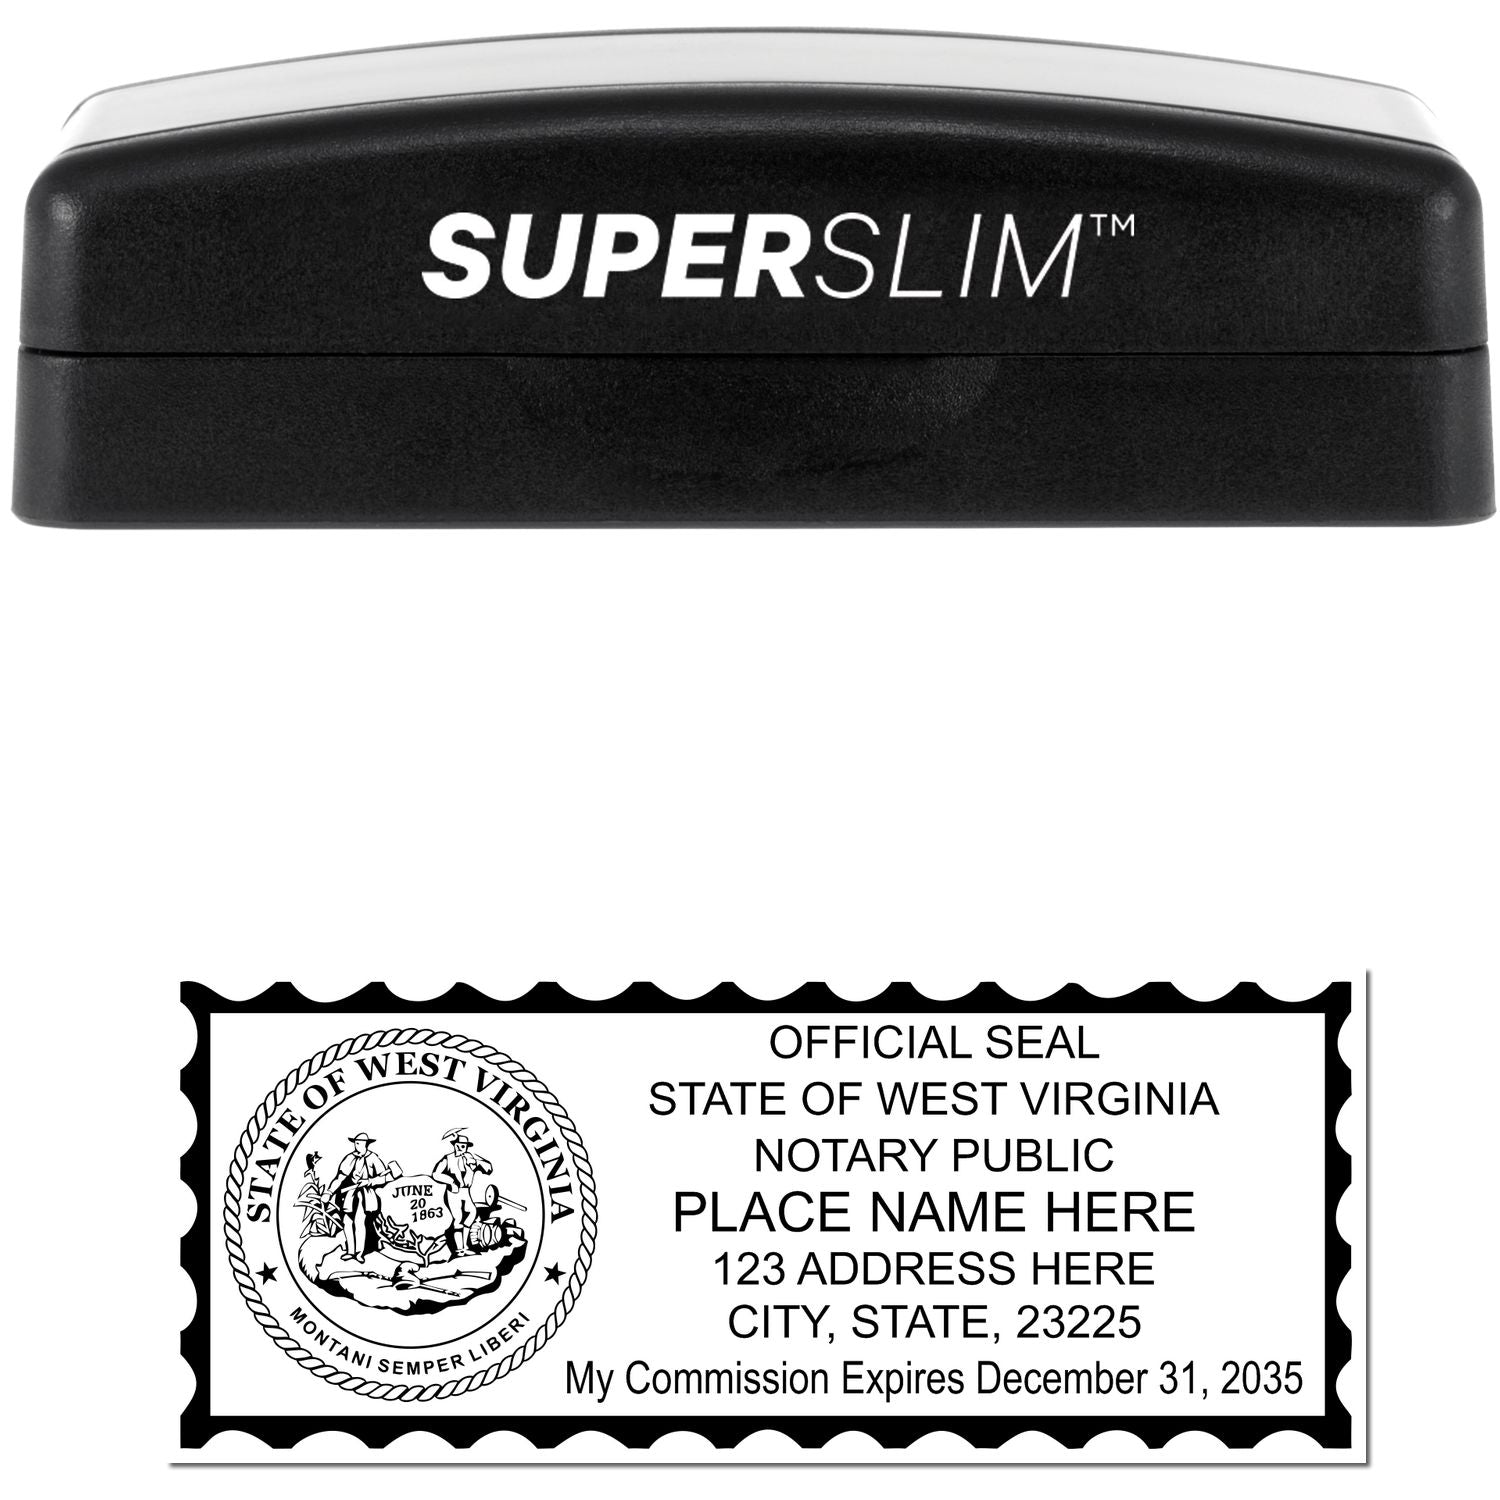 The main image for the Super Slim West Virginia Notary Public Stamp depicting a sample of the imprint and electronic files